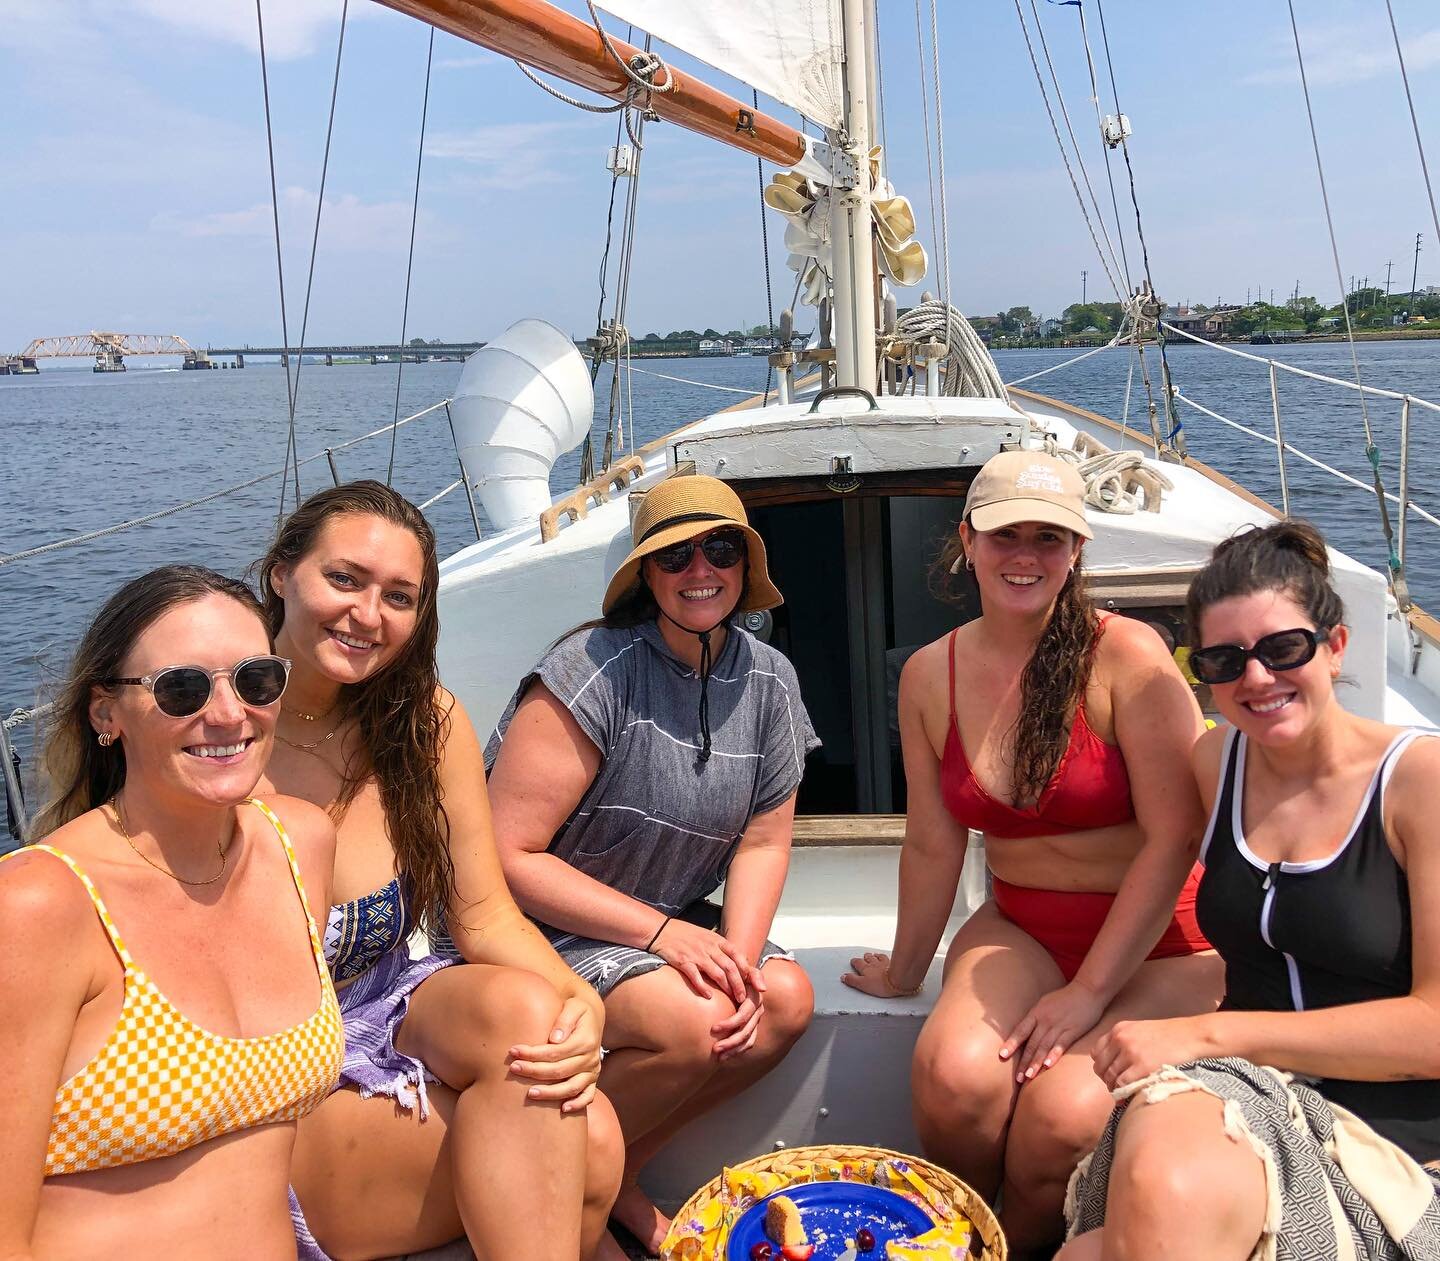 Ready to escape the hustle and bustle of NYC?  Set sail on a three hour daysail aboard Schooner Deliverance in Jamaica Bay. It&rsquo;s time to unwind and experience bliss on the water. Swipe ➡️ to get $100 off your 3 hour sail with our code!
&bull;
&